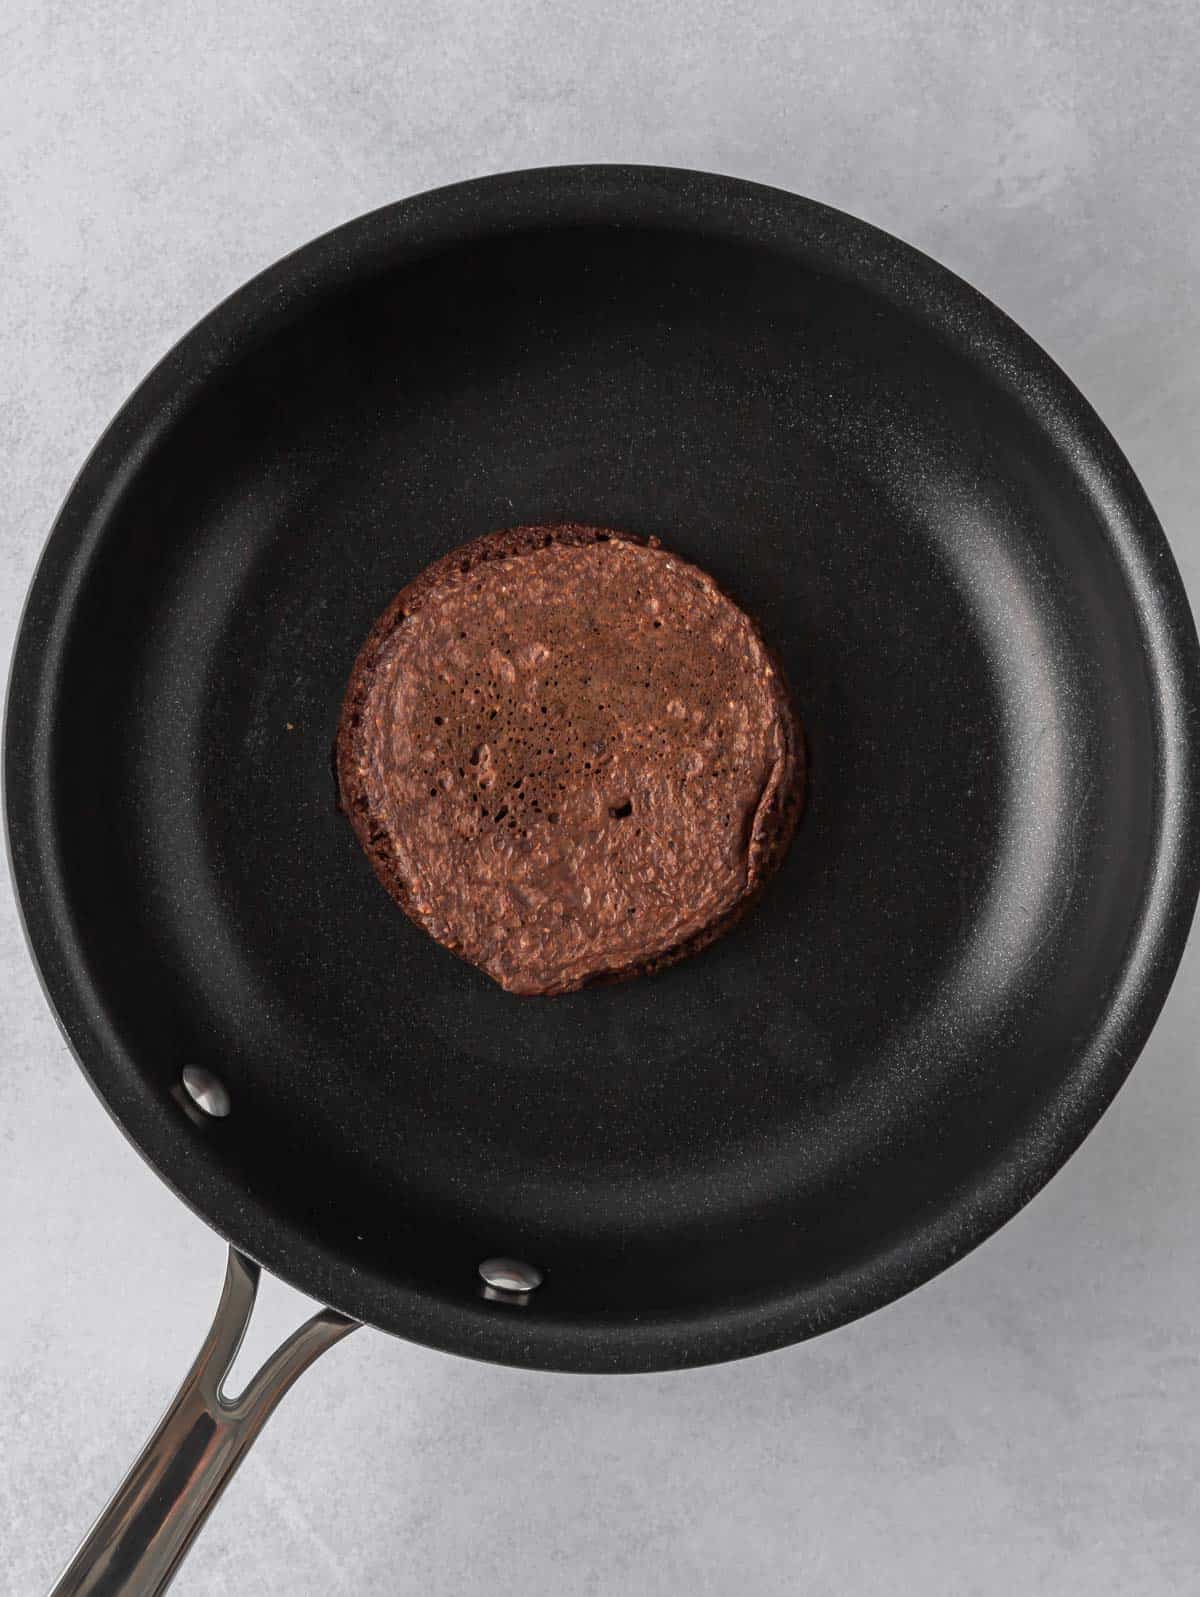 A chocolate pancake cooks in a skillet.